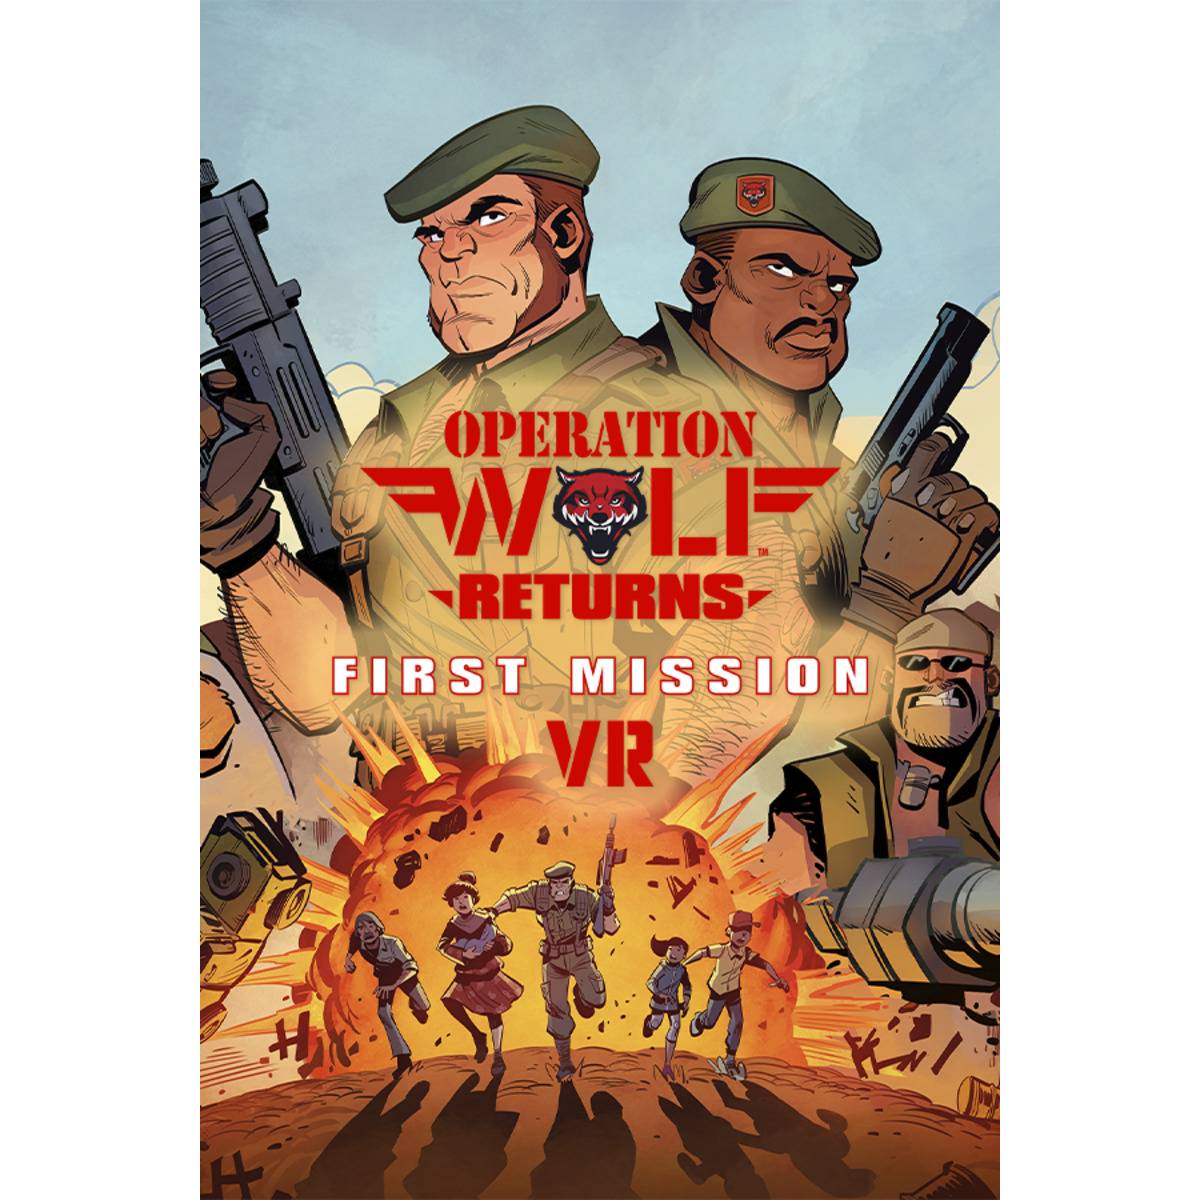 Operation Wolf Returns: First Mission PlayStation 5 - Best Buy